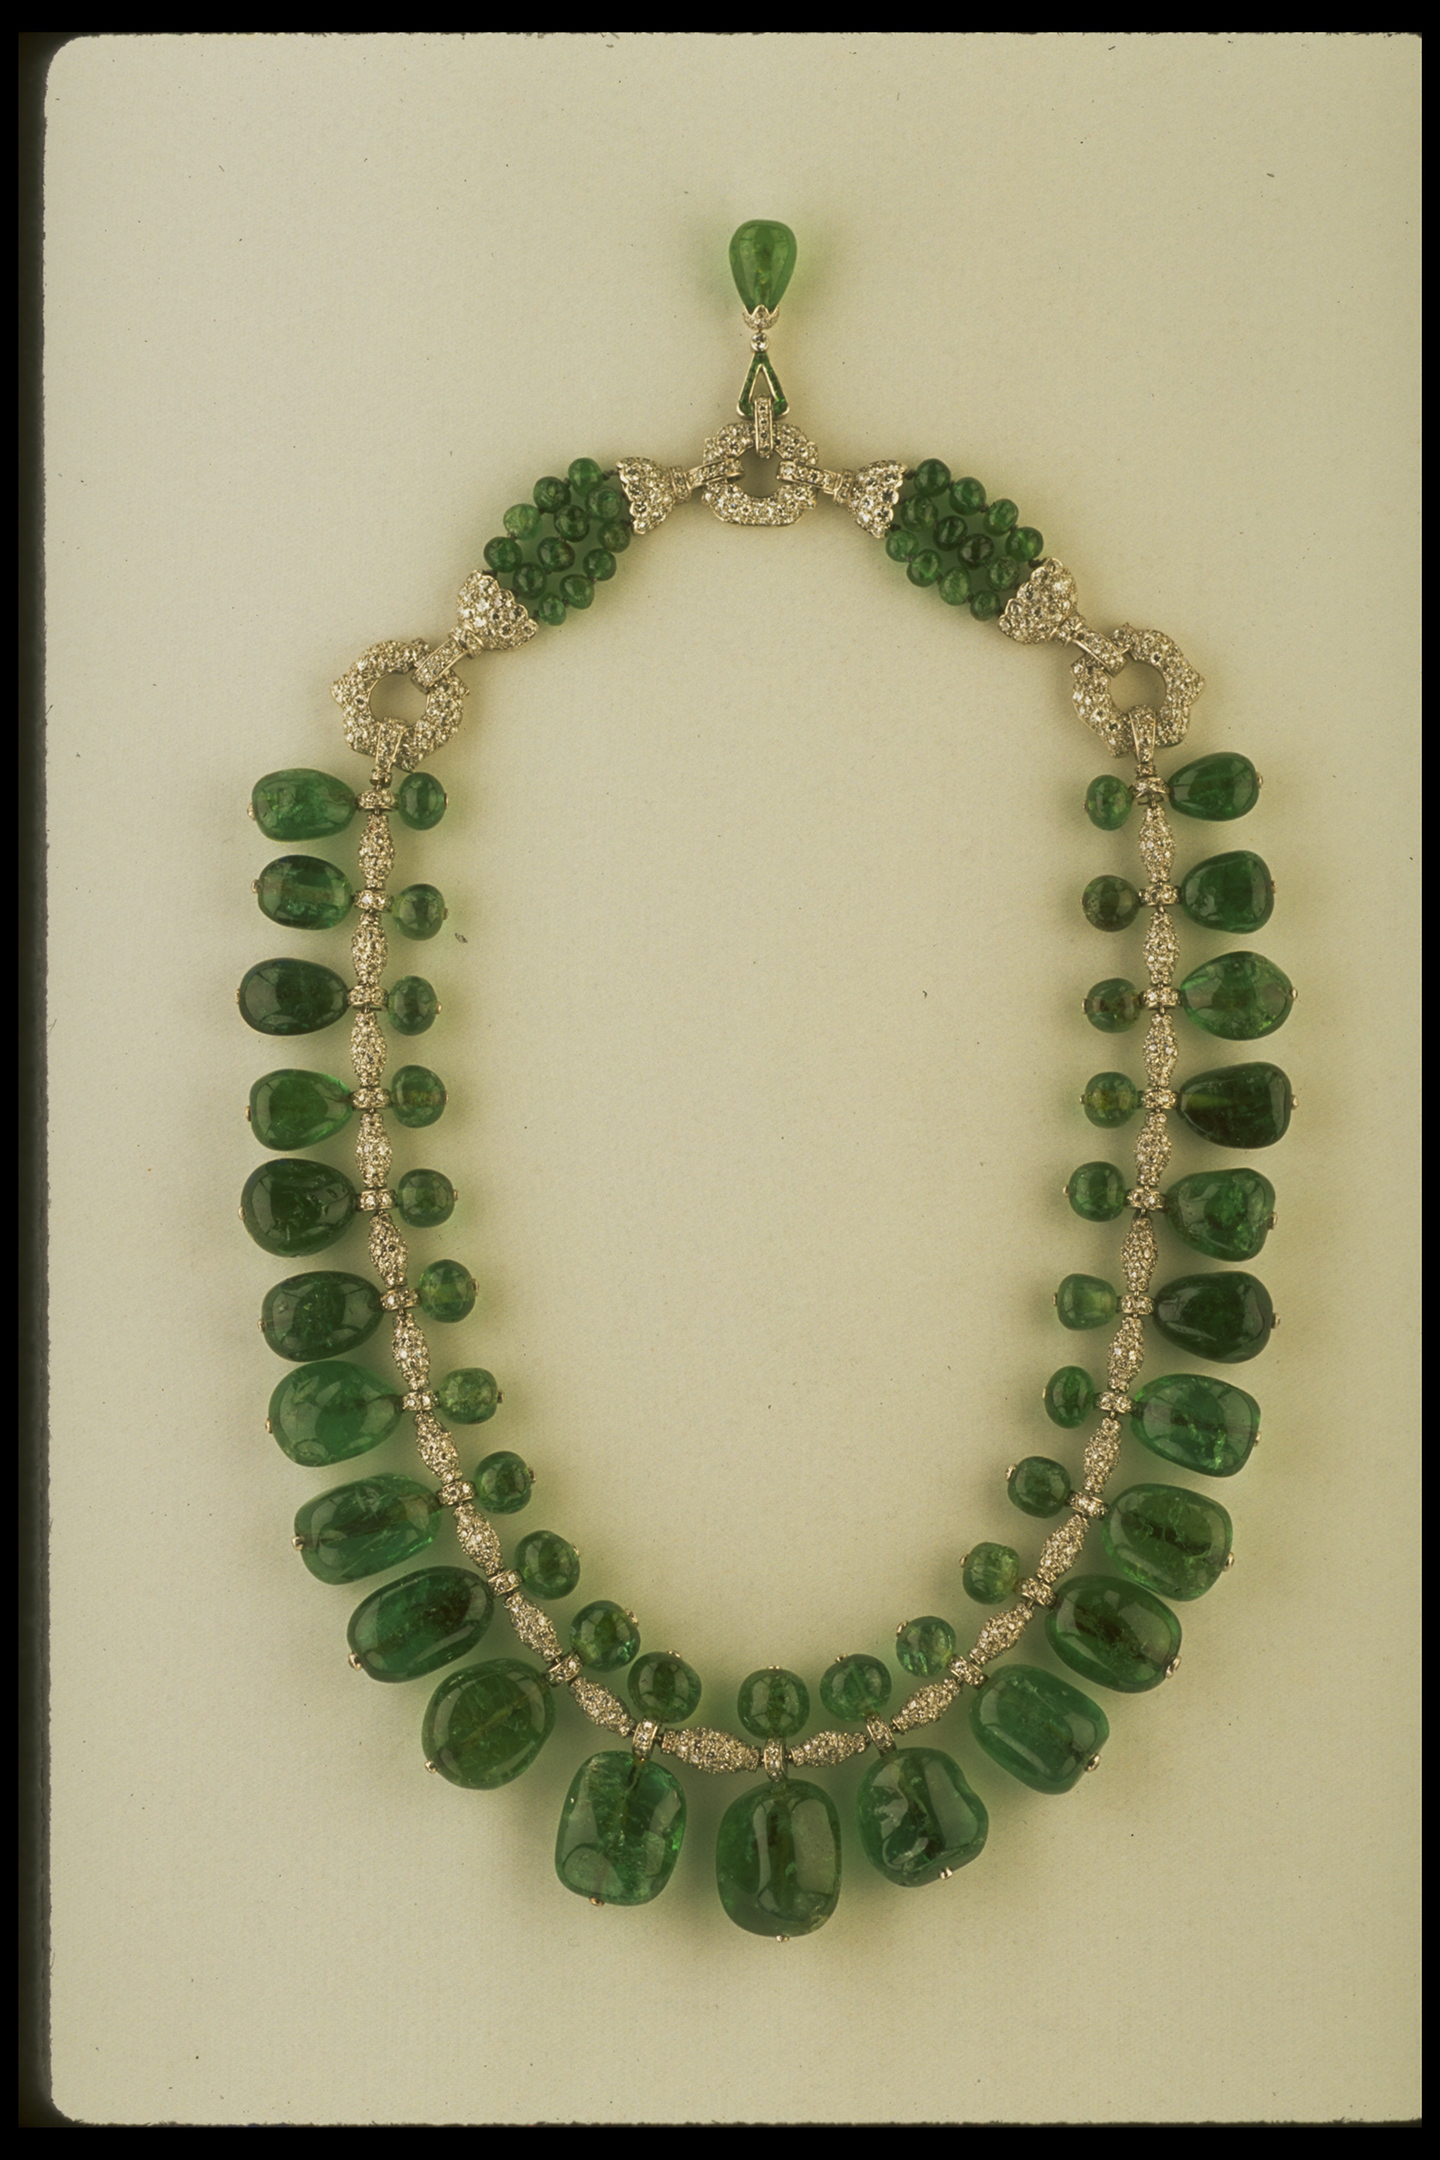 This emerald, diamond, and platinum necklace was designed around 1929. Photo courtesy of the National Museum of Natural History, G5023.